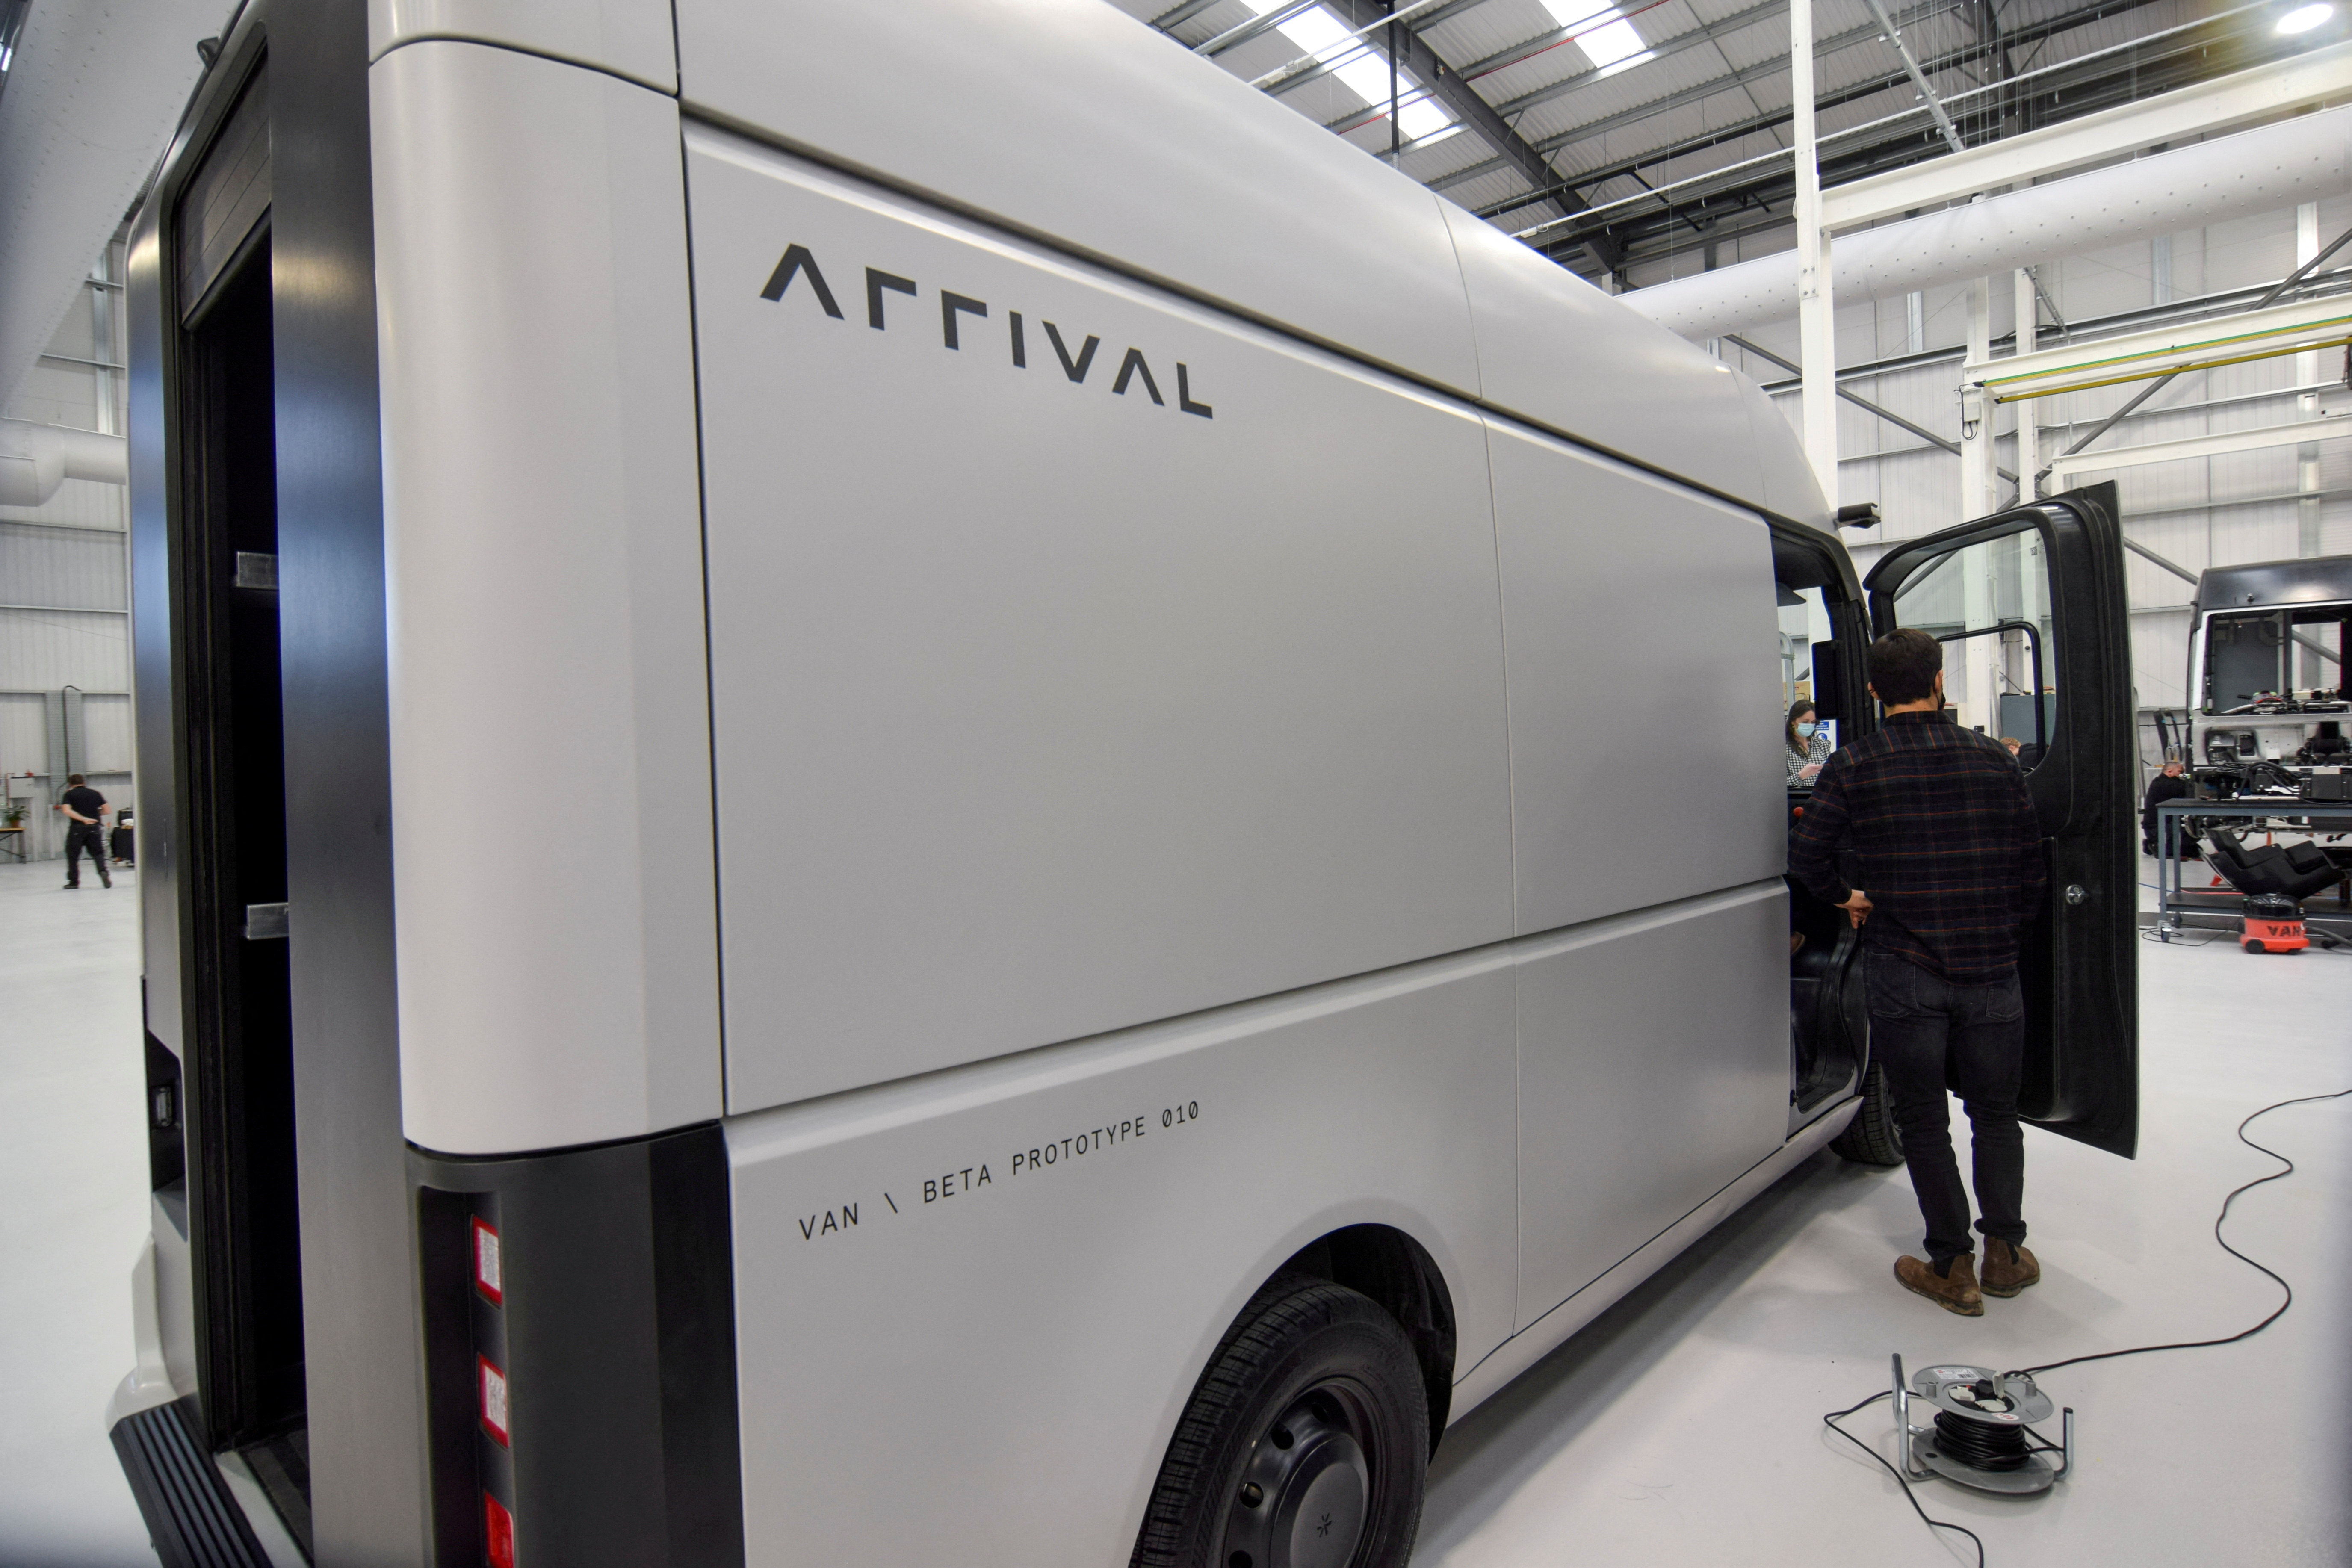 A fully electric test van by British bus maker Arrival Ltd, due to start production in 2022